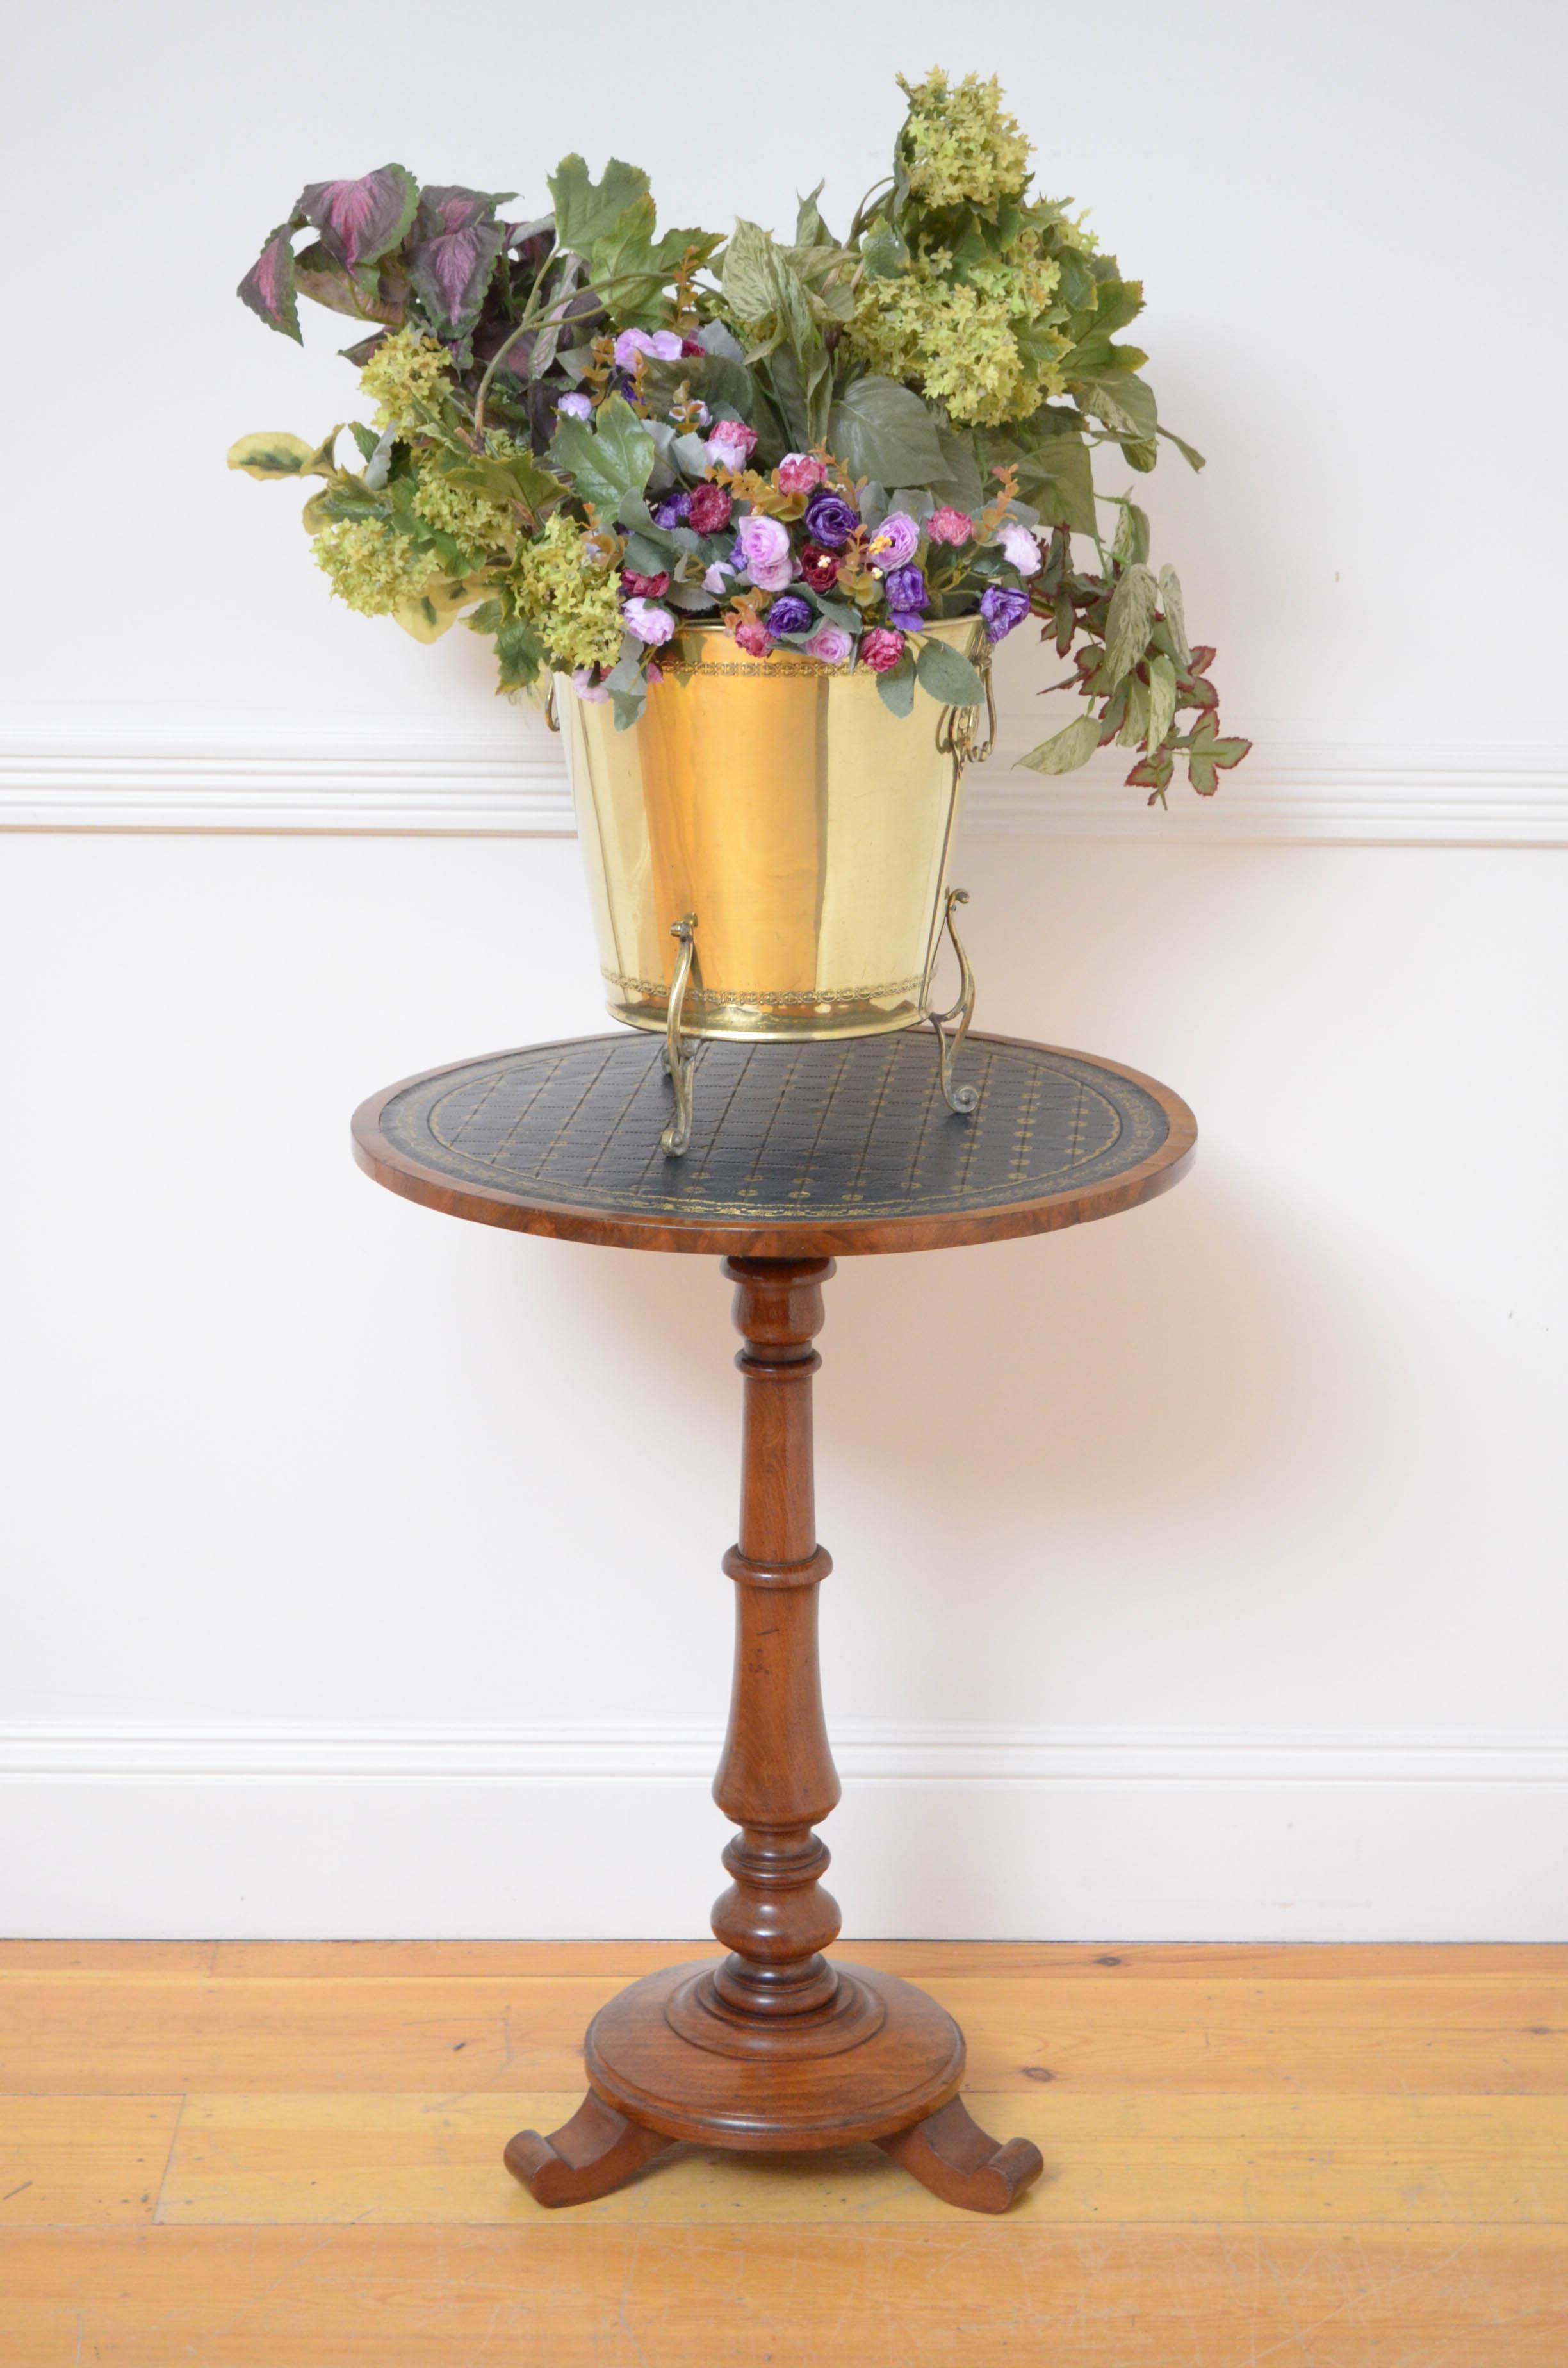 K0 Edwardian brass coal bucket or planter, having original lift up lid with beaded edge enclosing original removable liner, all fitted with shaped carrying handles and 3 cabriole legs. Dieser antike Kohlenkasten wurde gereinigt und poliert und ist